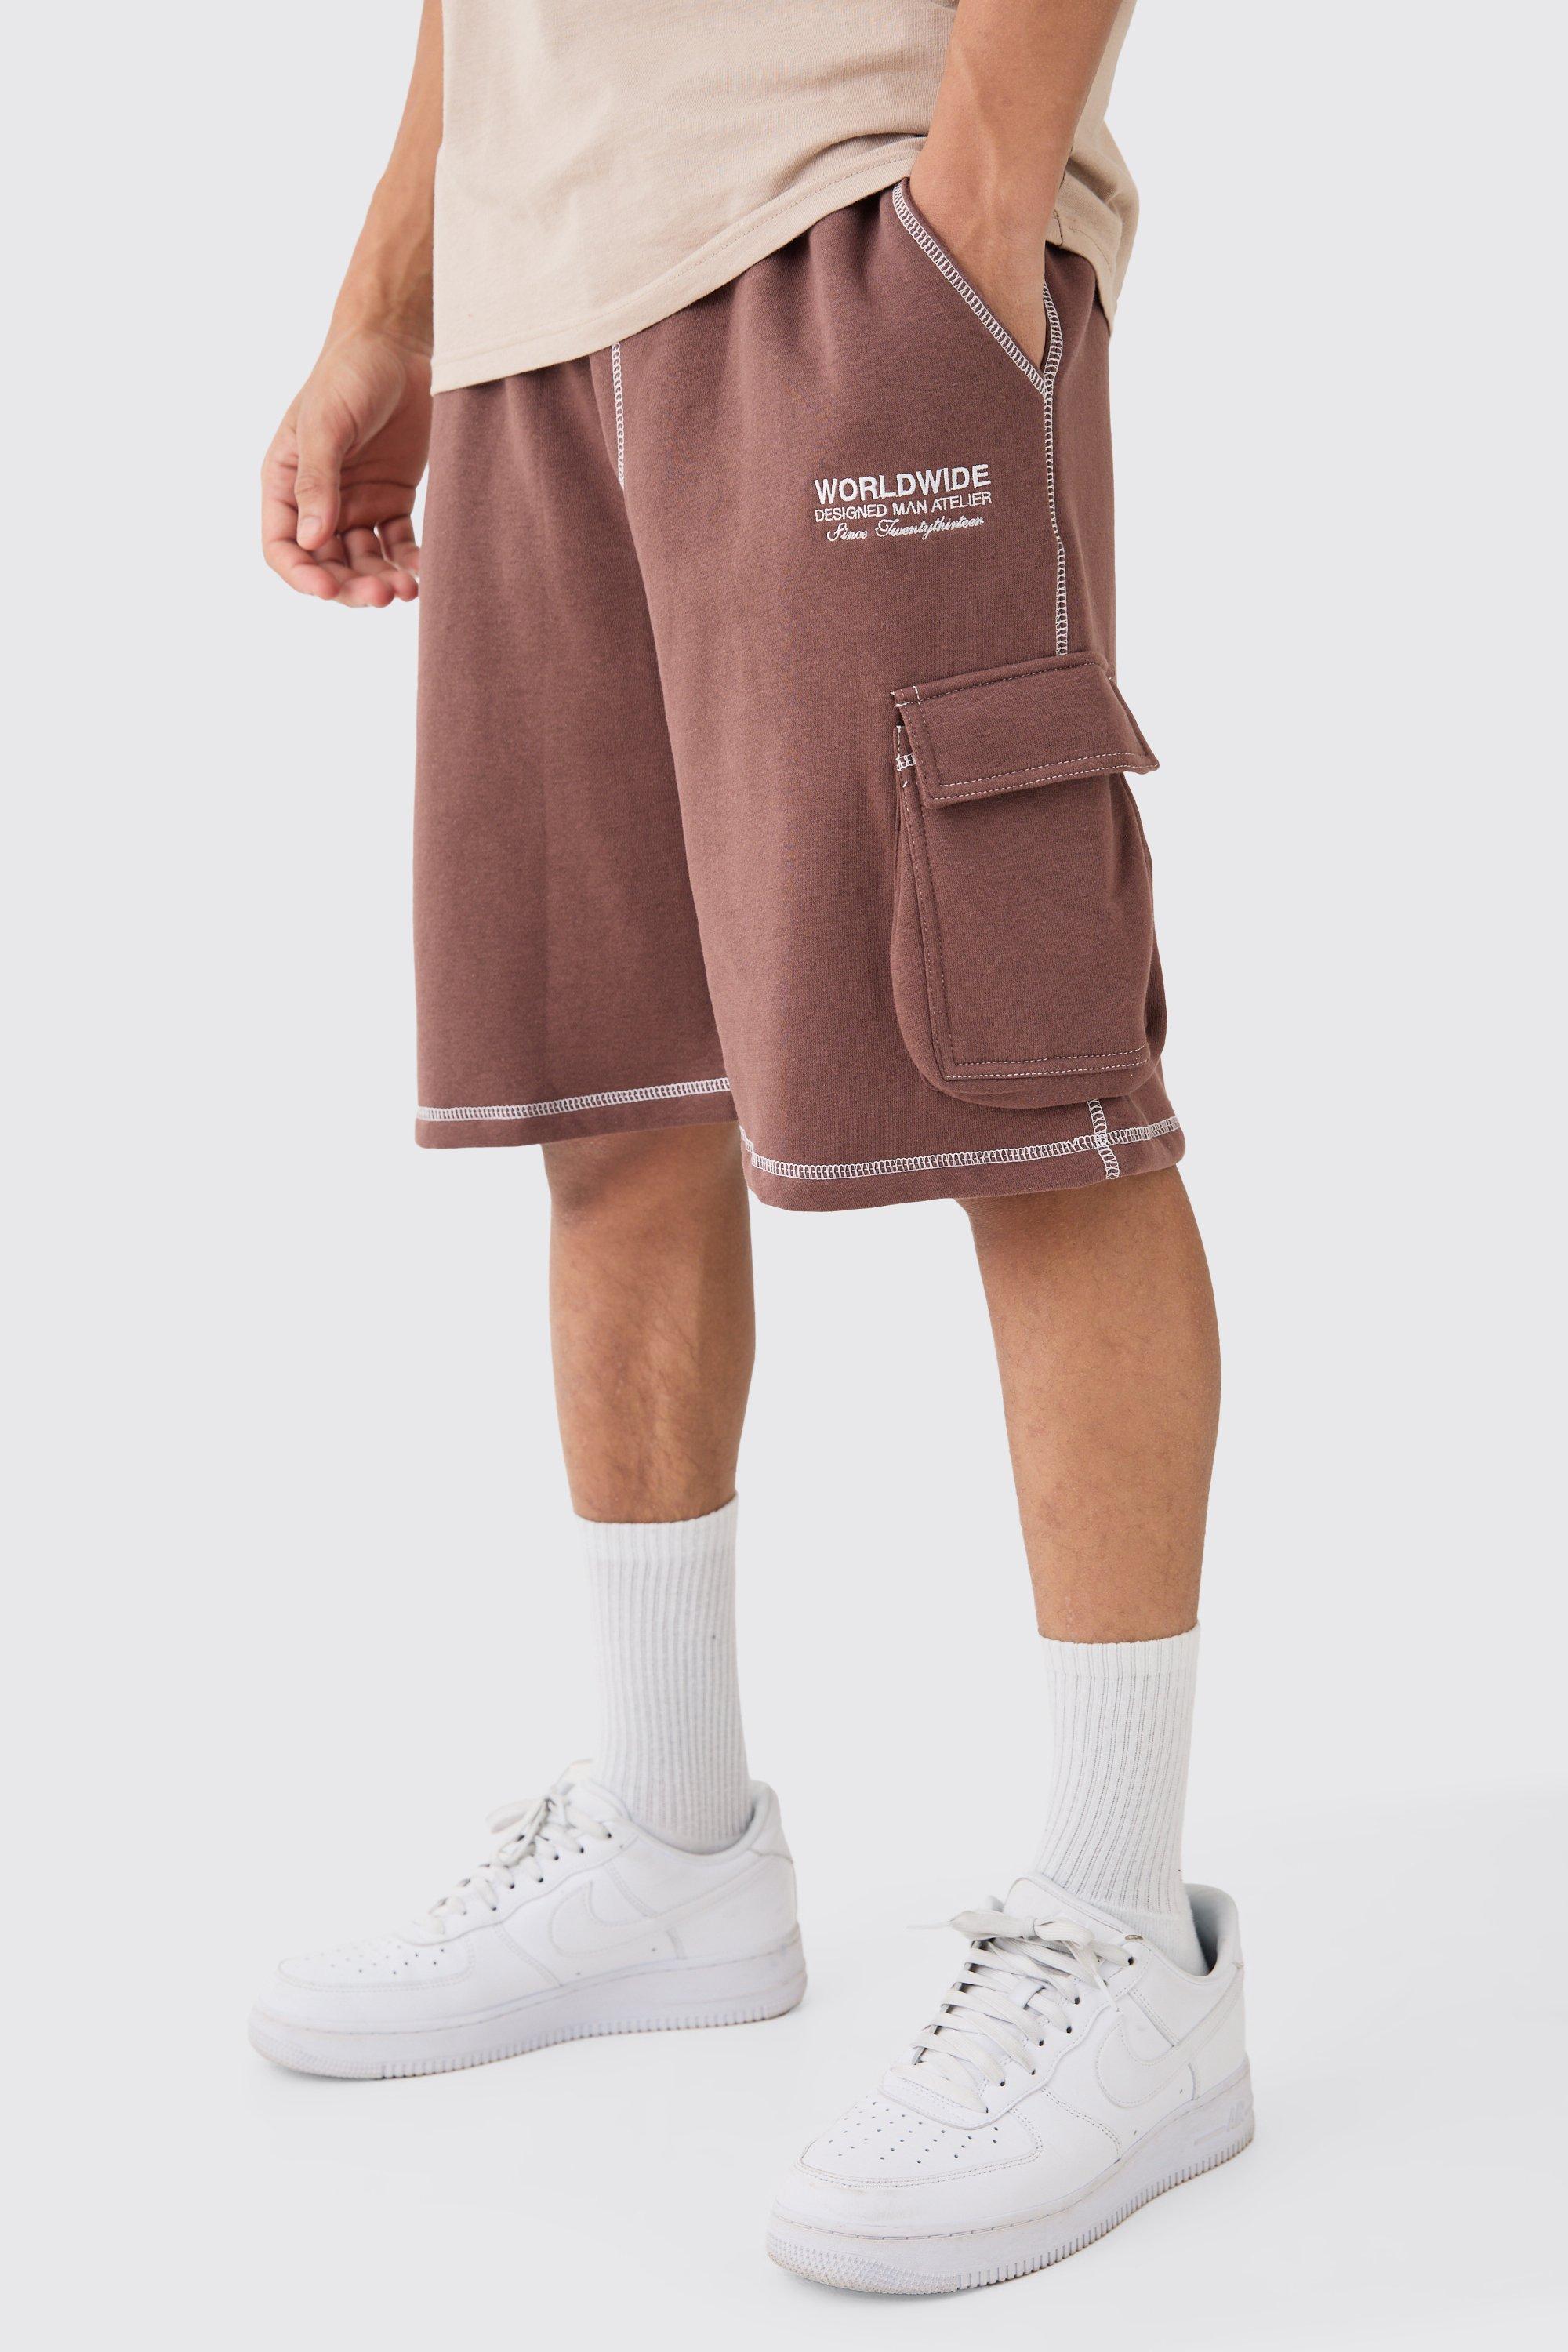 Image of Relaxed Worlwide Contrast Stitch Cargo Shorts, Brown